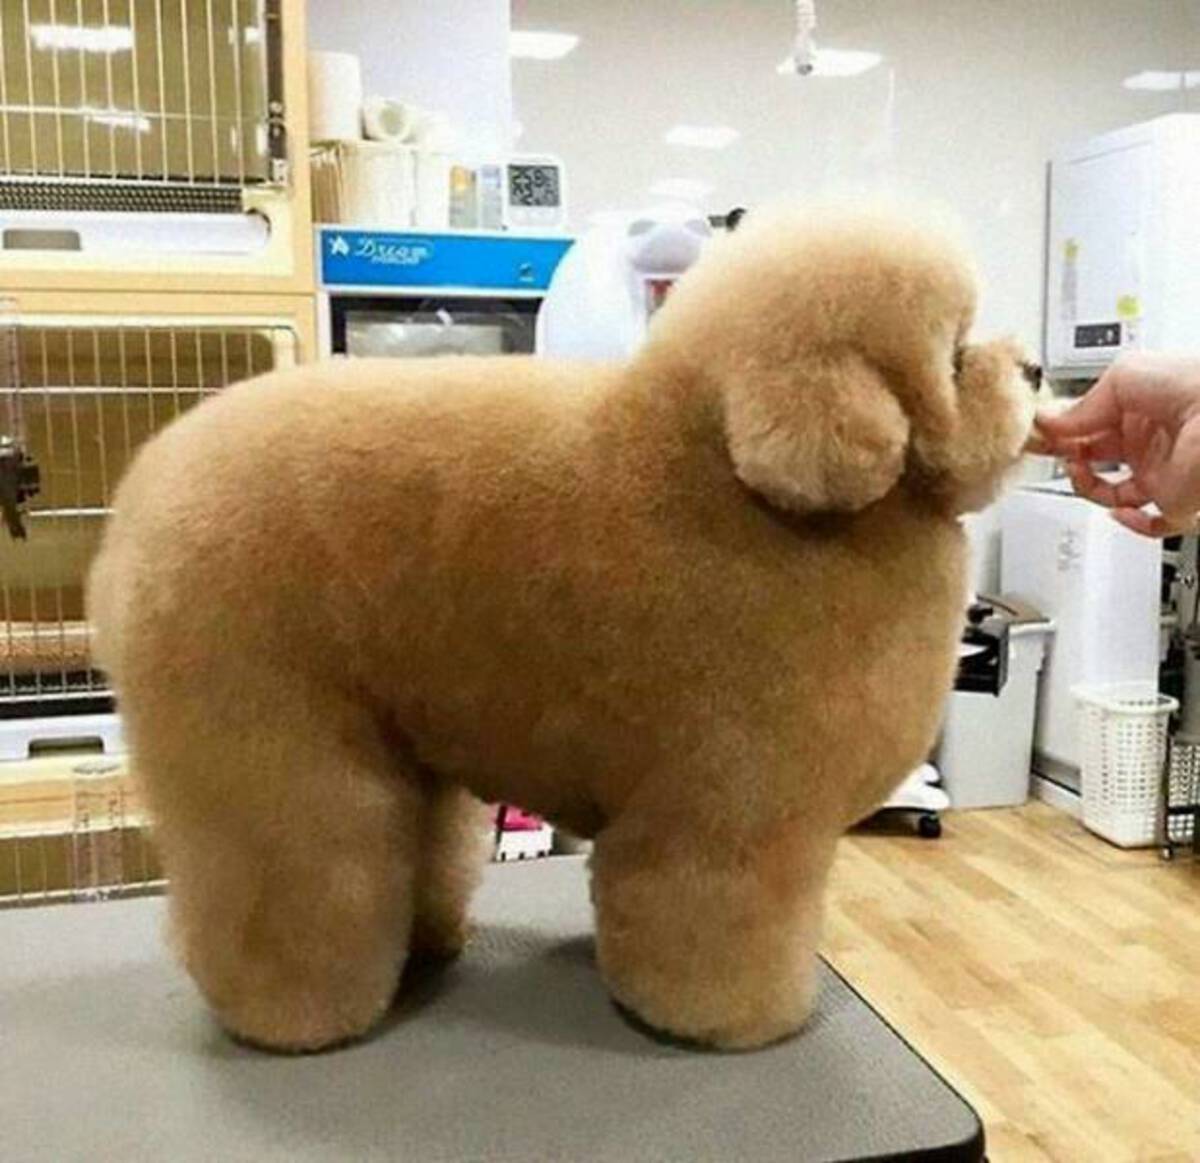 absolute unit dog